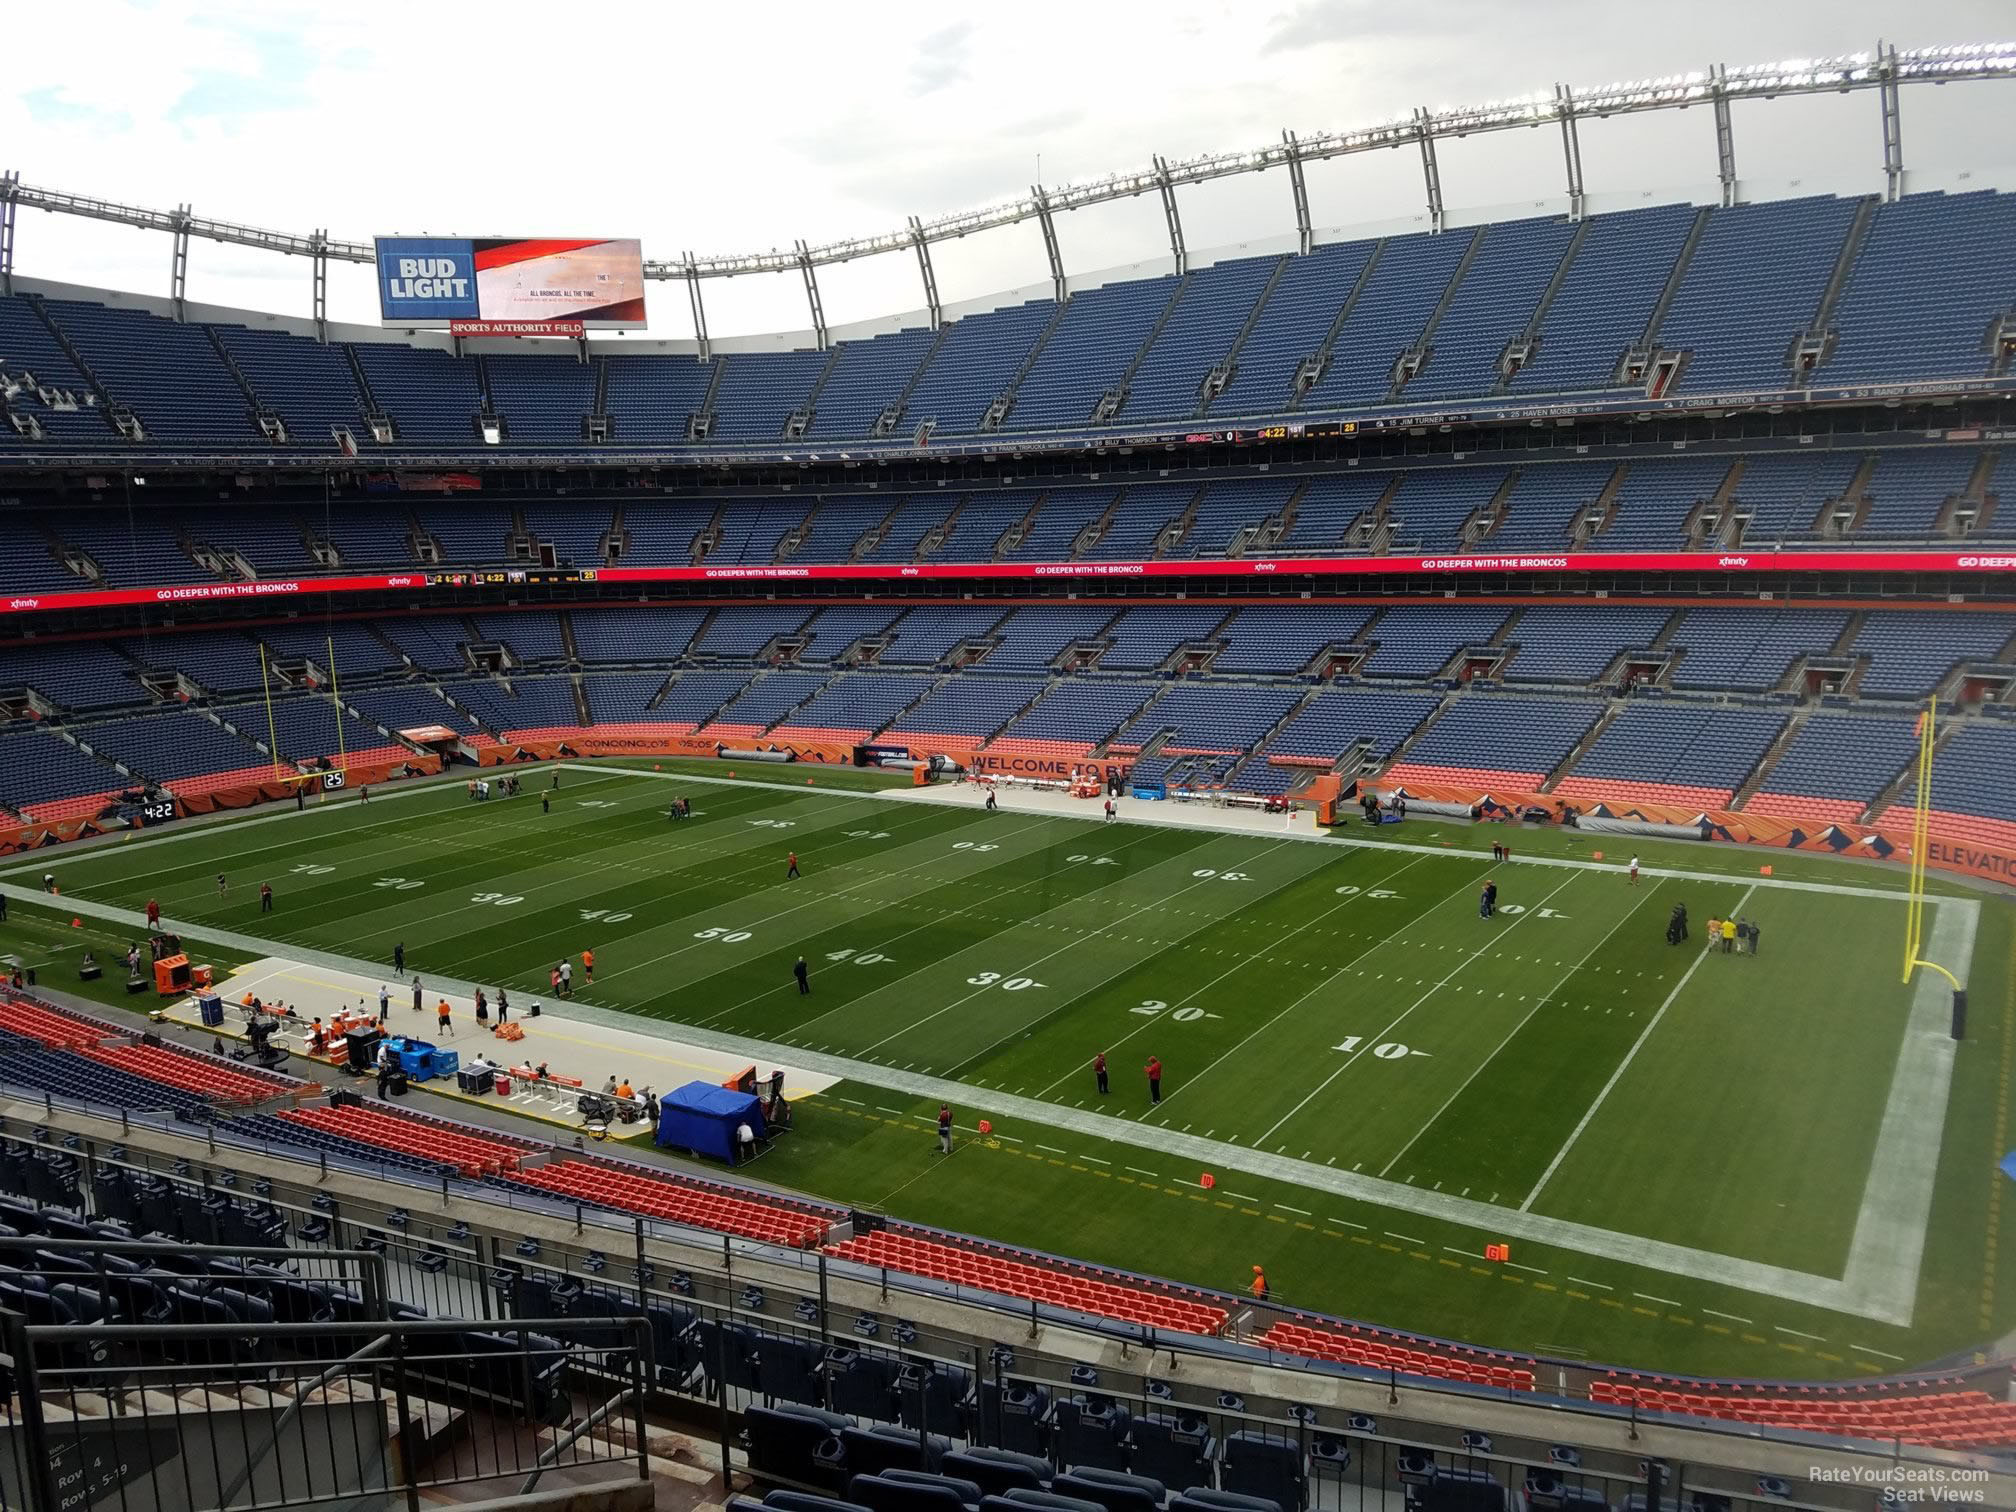 section 303, row 12 seat view  - empower field (at mile high)